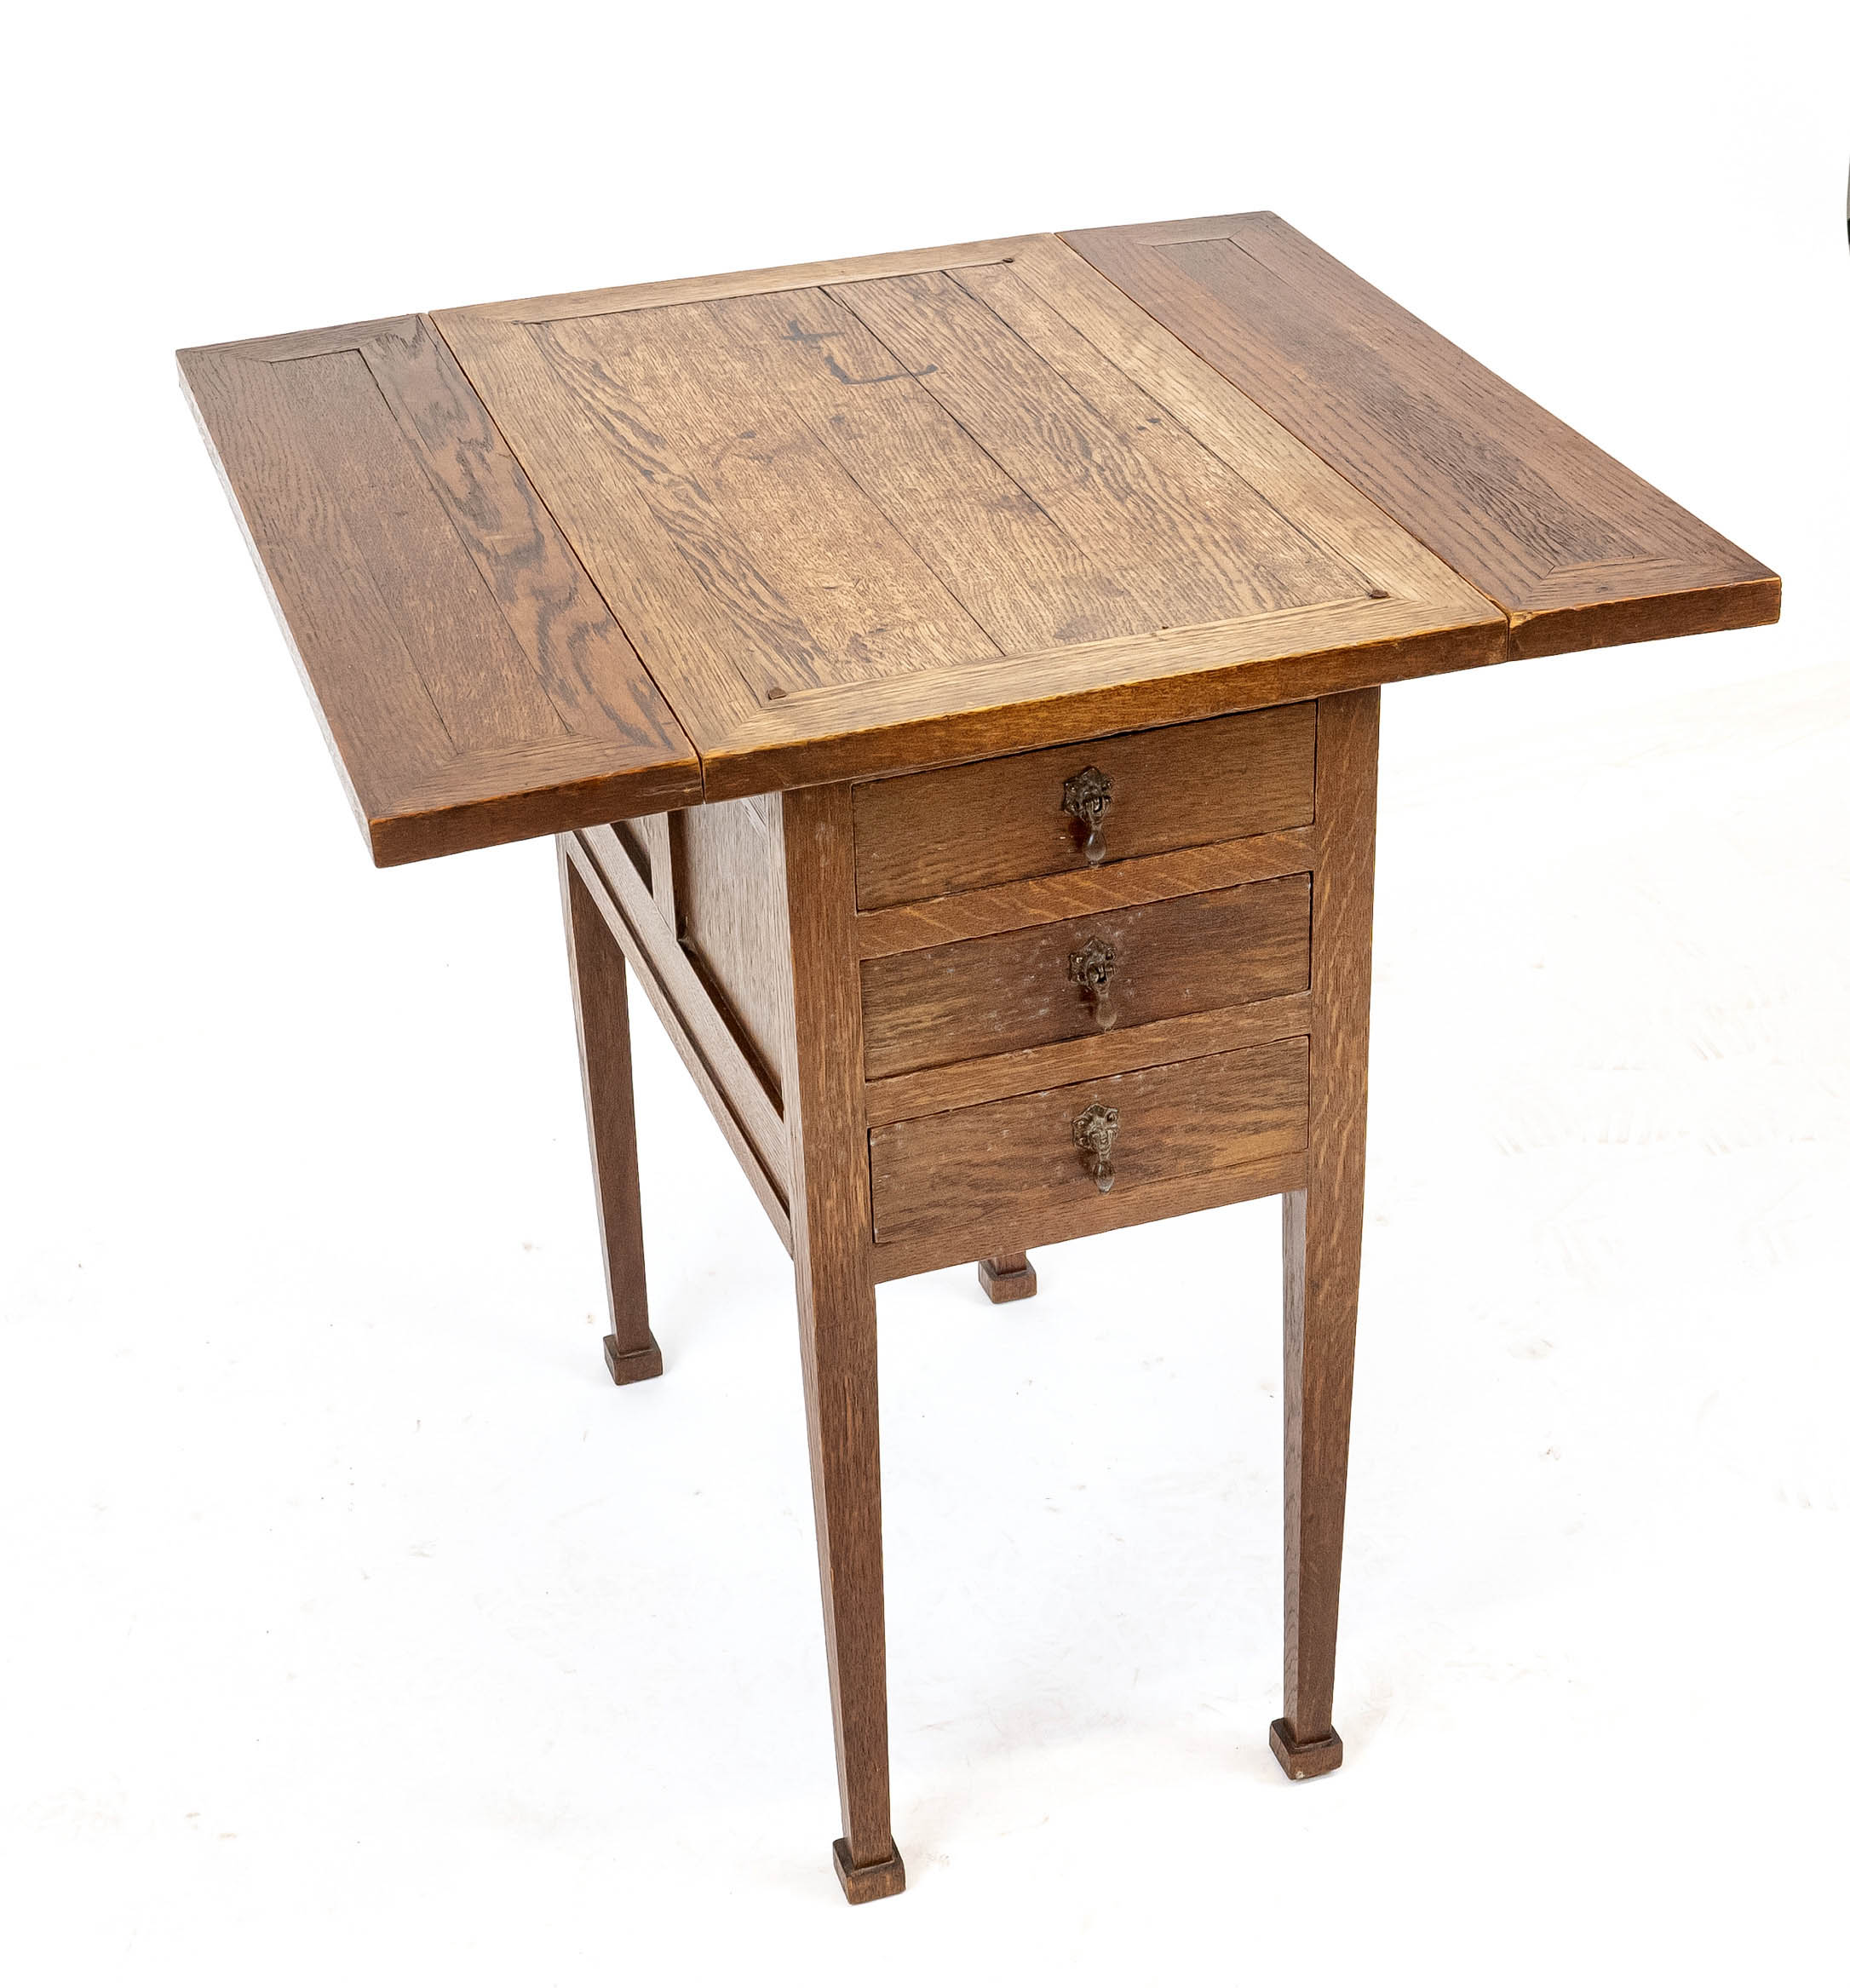 English folding table around 1900, oak, three drawers on the side, opposite door, 76 x 65 x 46/70